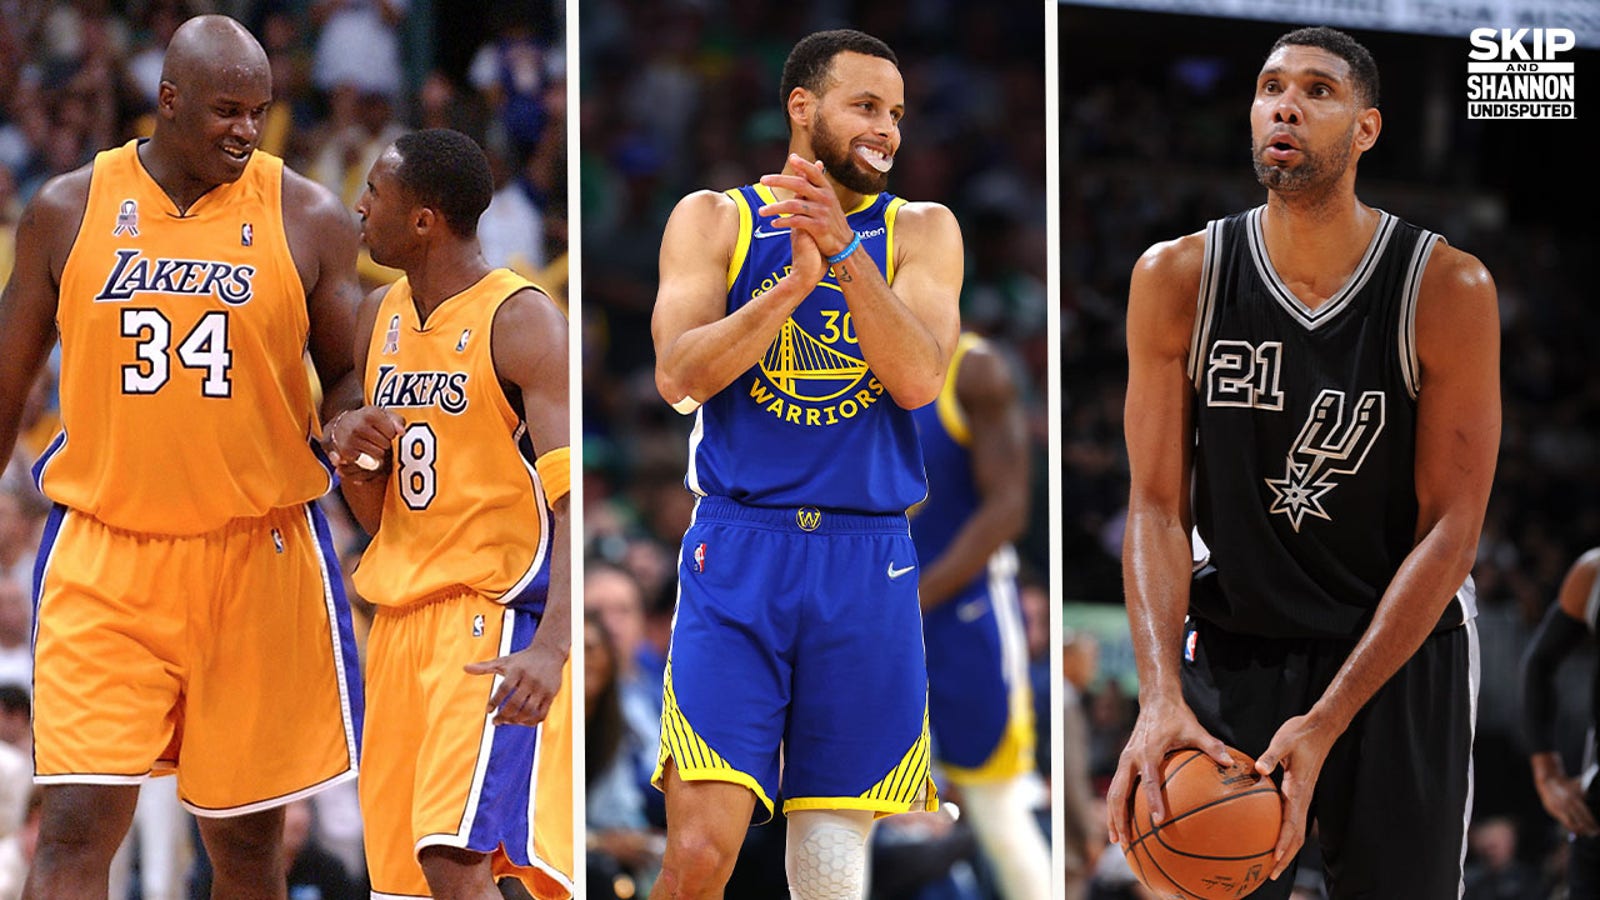 Does Steph Curry belong in the same class as Kobe, Shaq and Duncan?